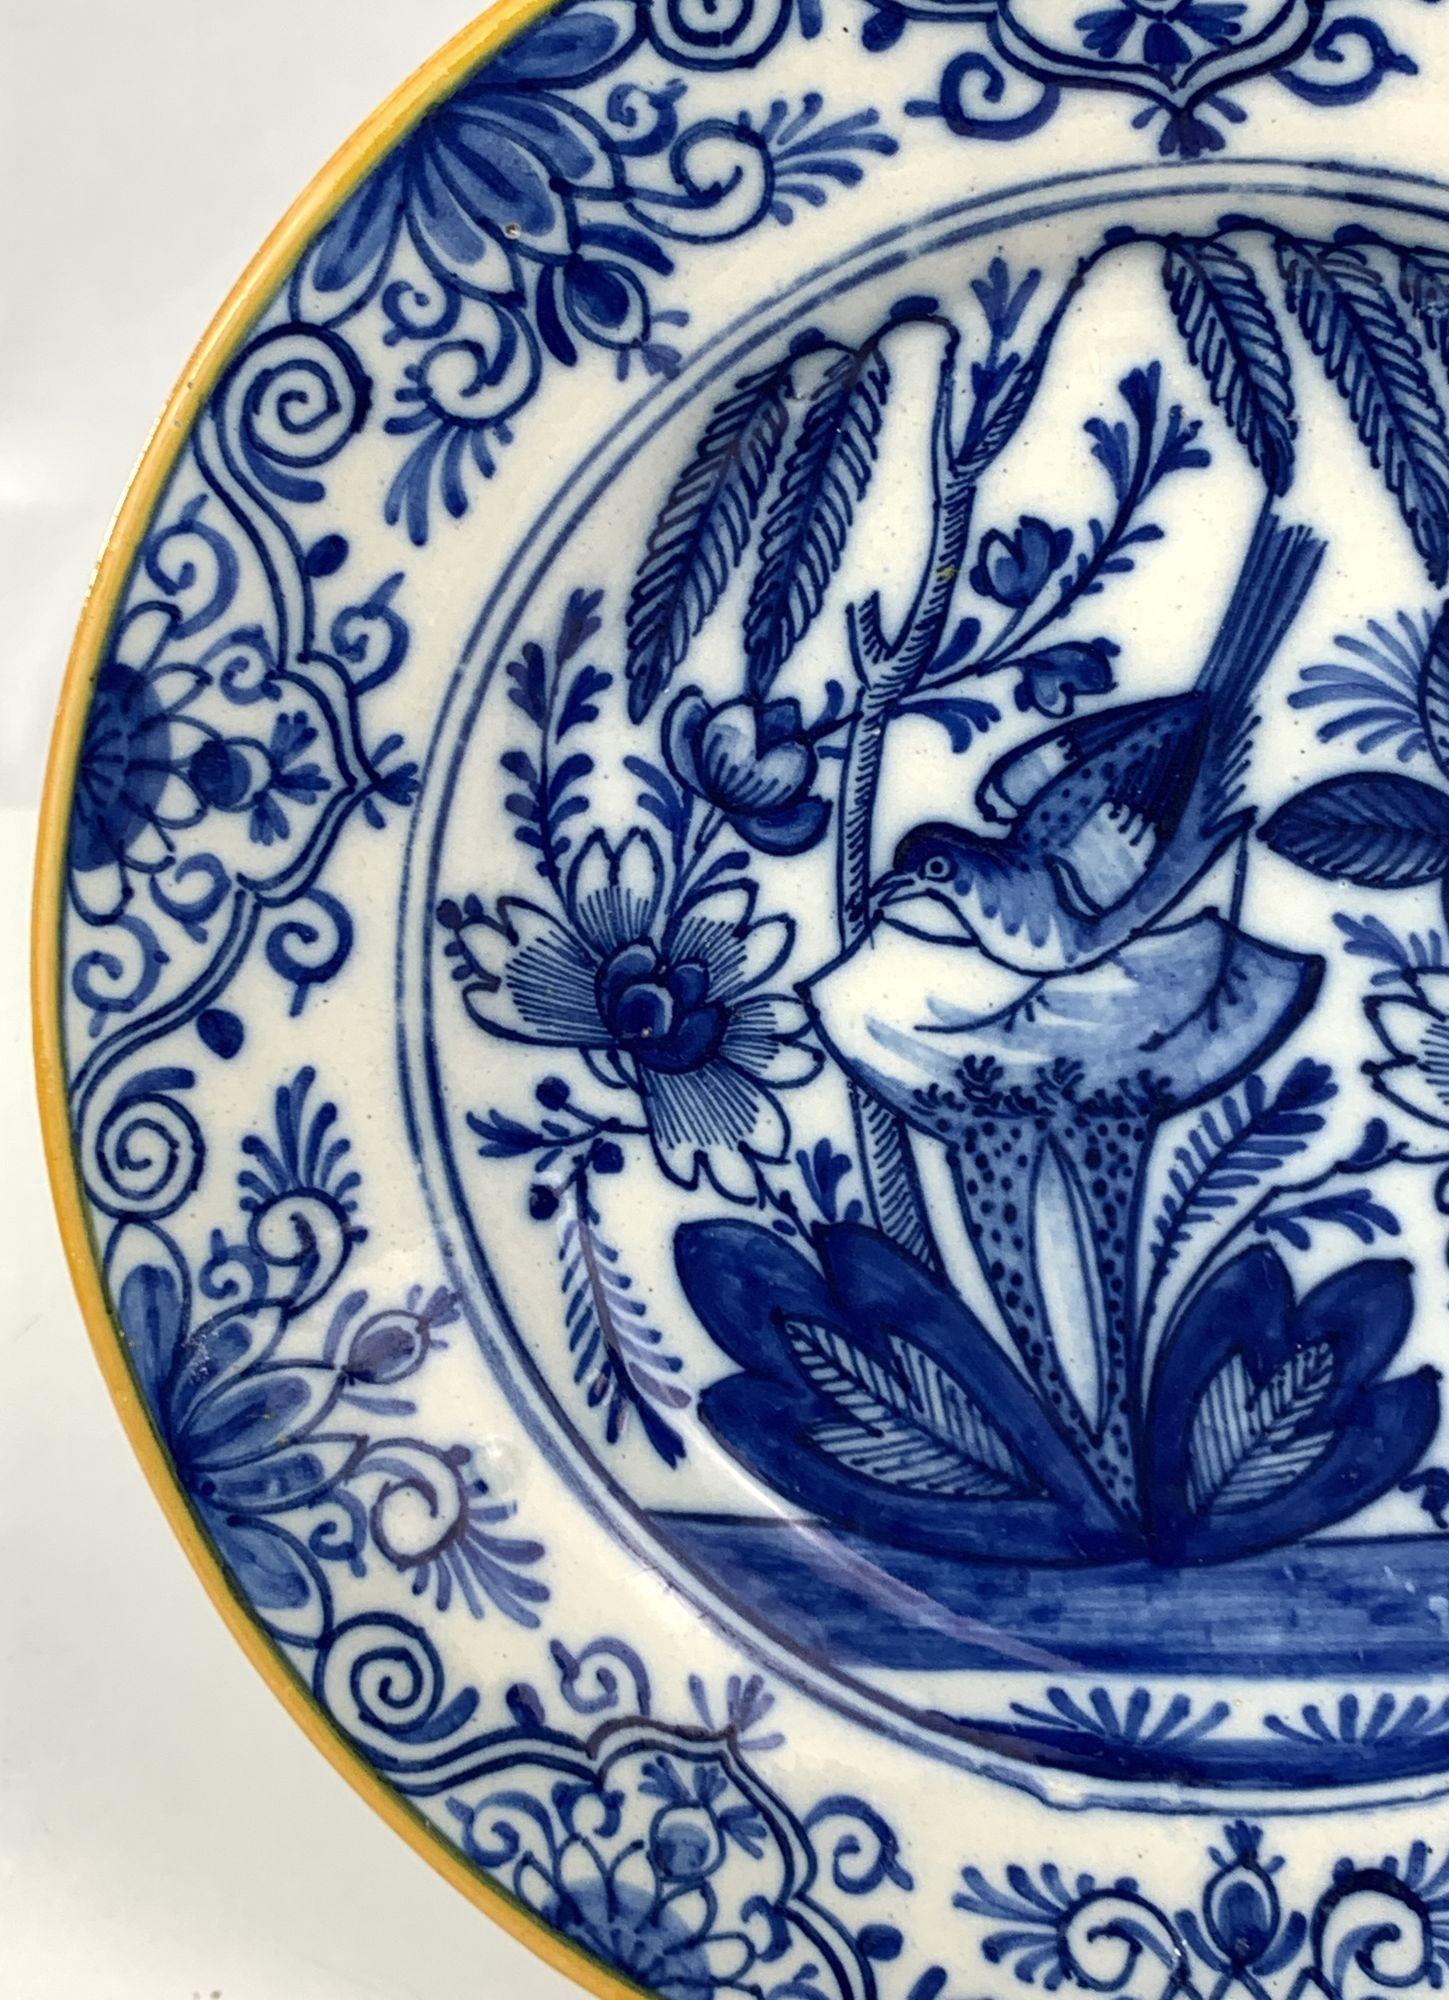 Blue and White Delft Plate with Bird Made Netherlands 18th Century Circa 1780 In Excellent Condition For Sale In Katonah, NY